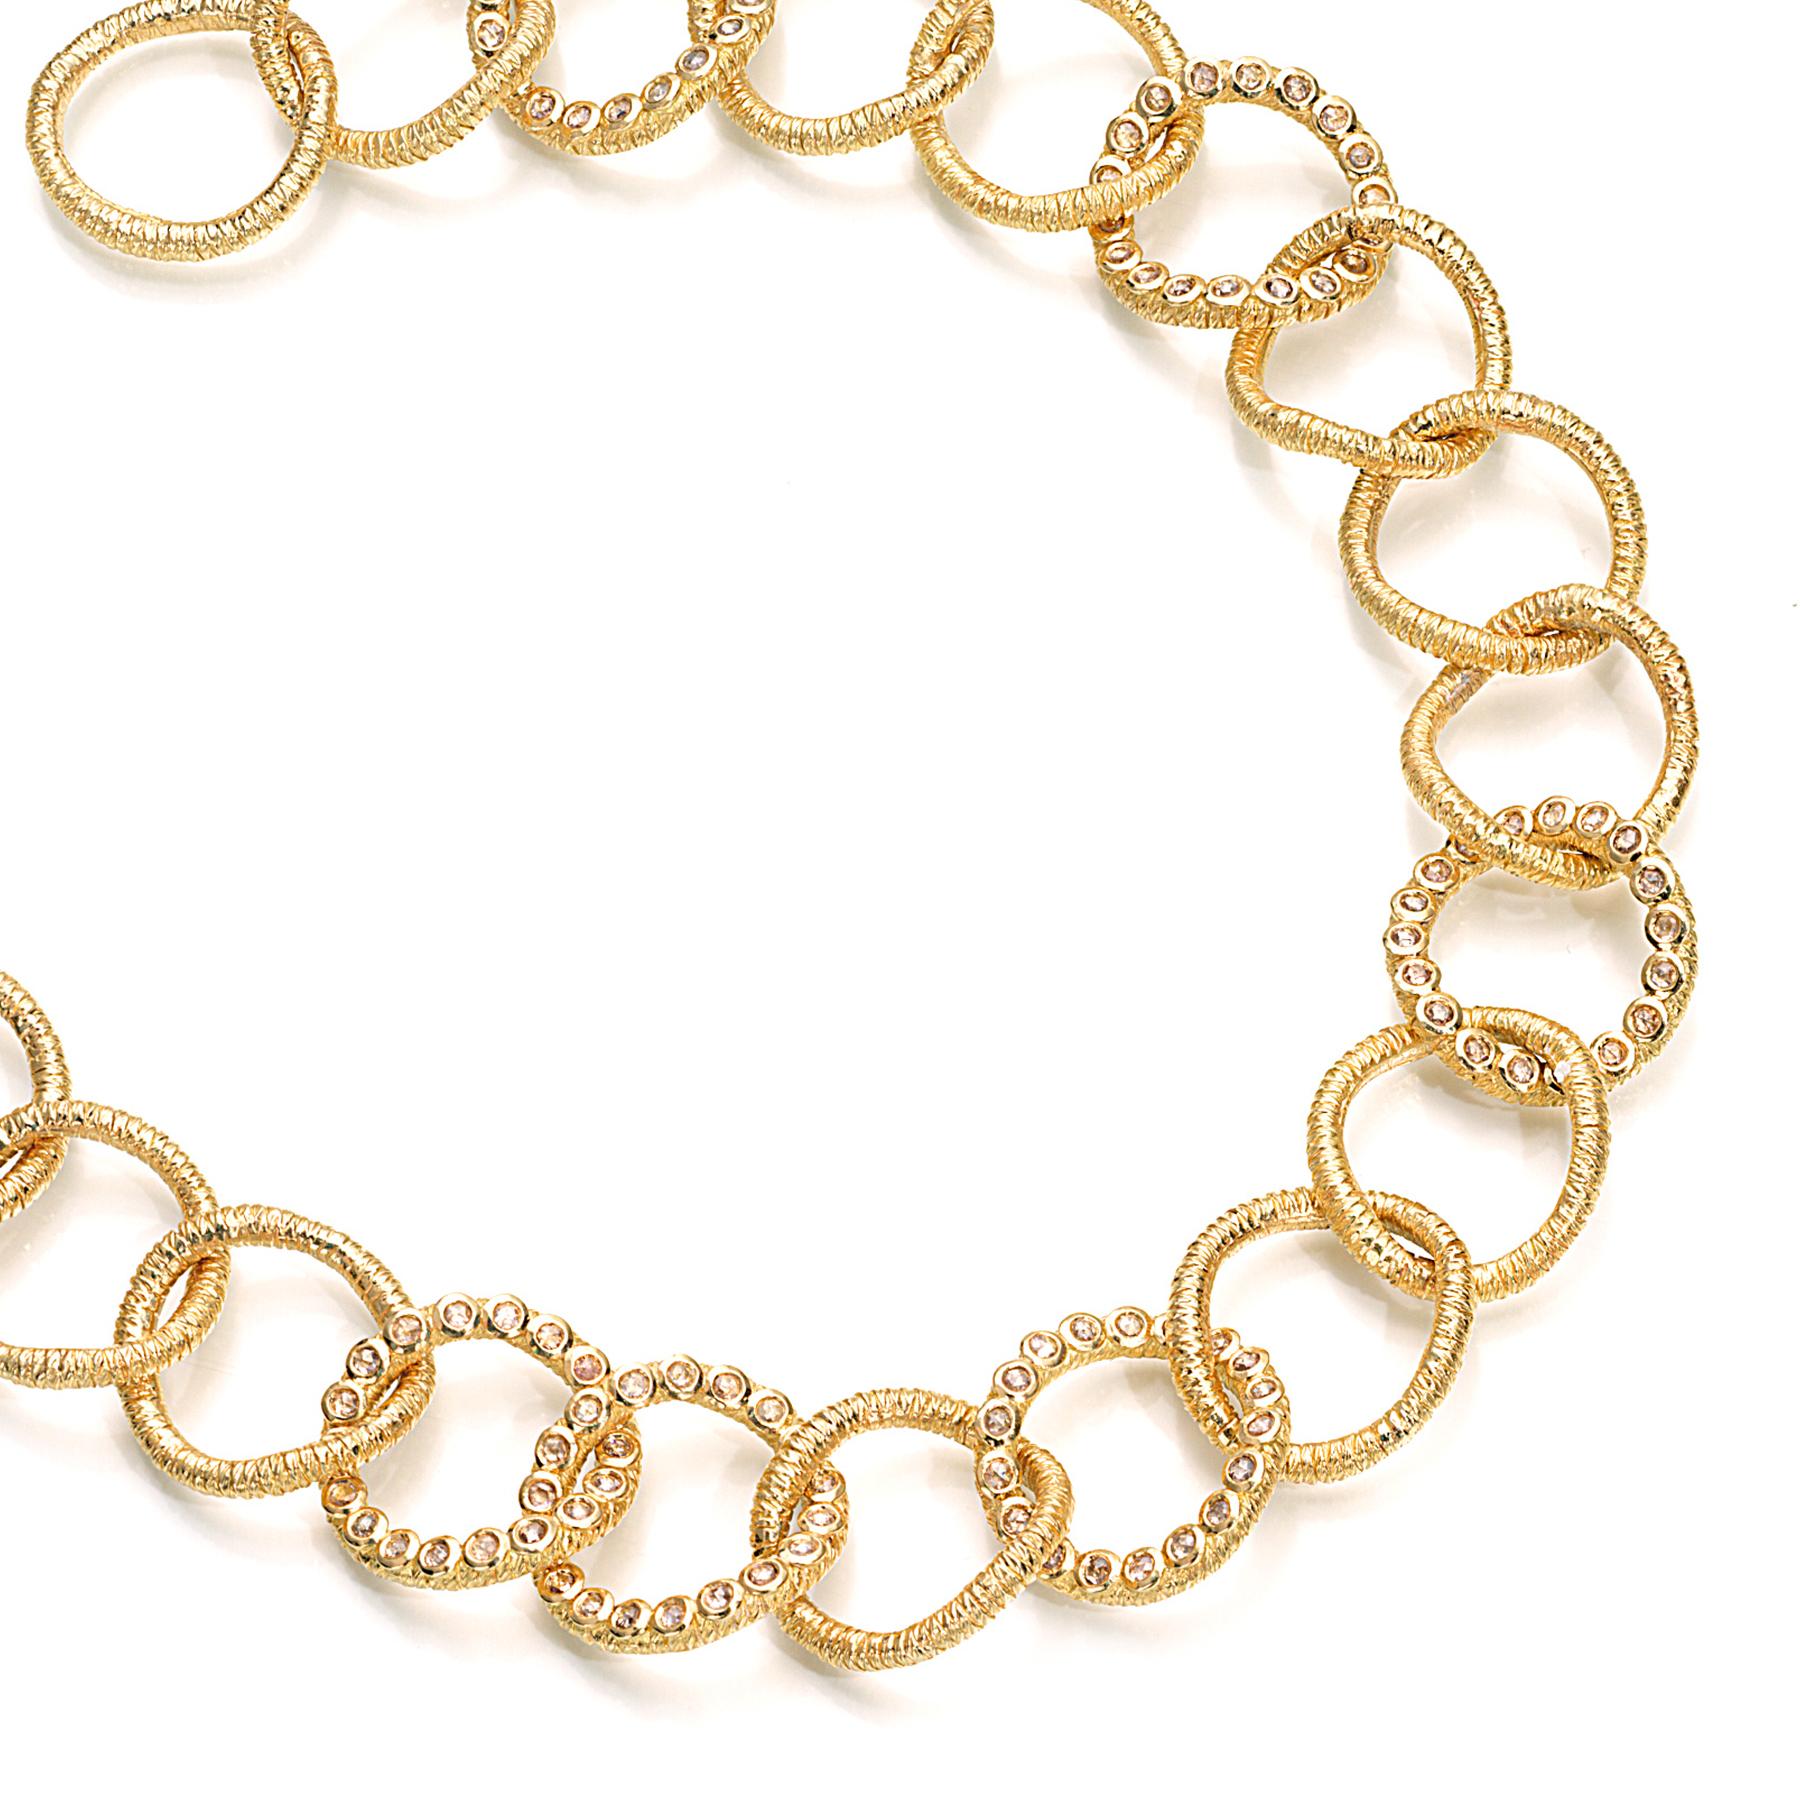 Wrapped Wire Circle Necklace Set in 20 karat Yellow Gold with 3.71-carat Brilliant Diamonds. This is part of COOMI's Eternity Collection which is inspired by the flow of movement through different shapes like circles, wires, and ovals.